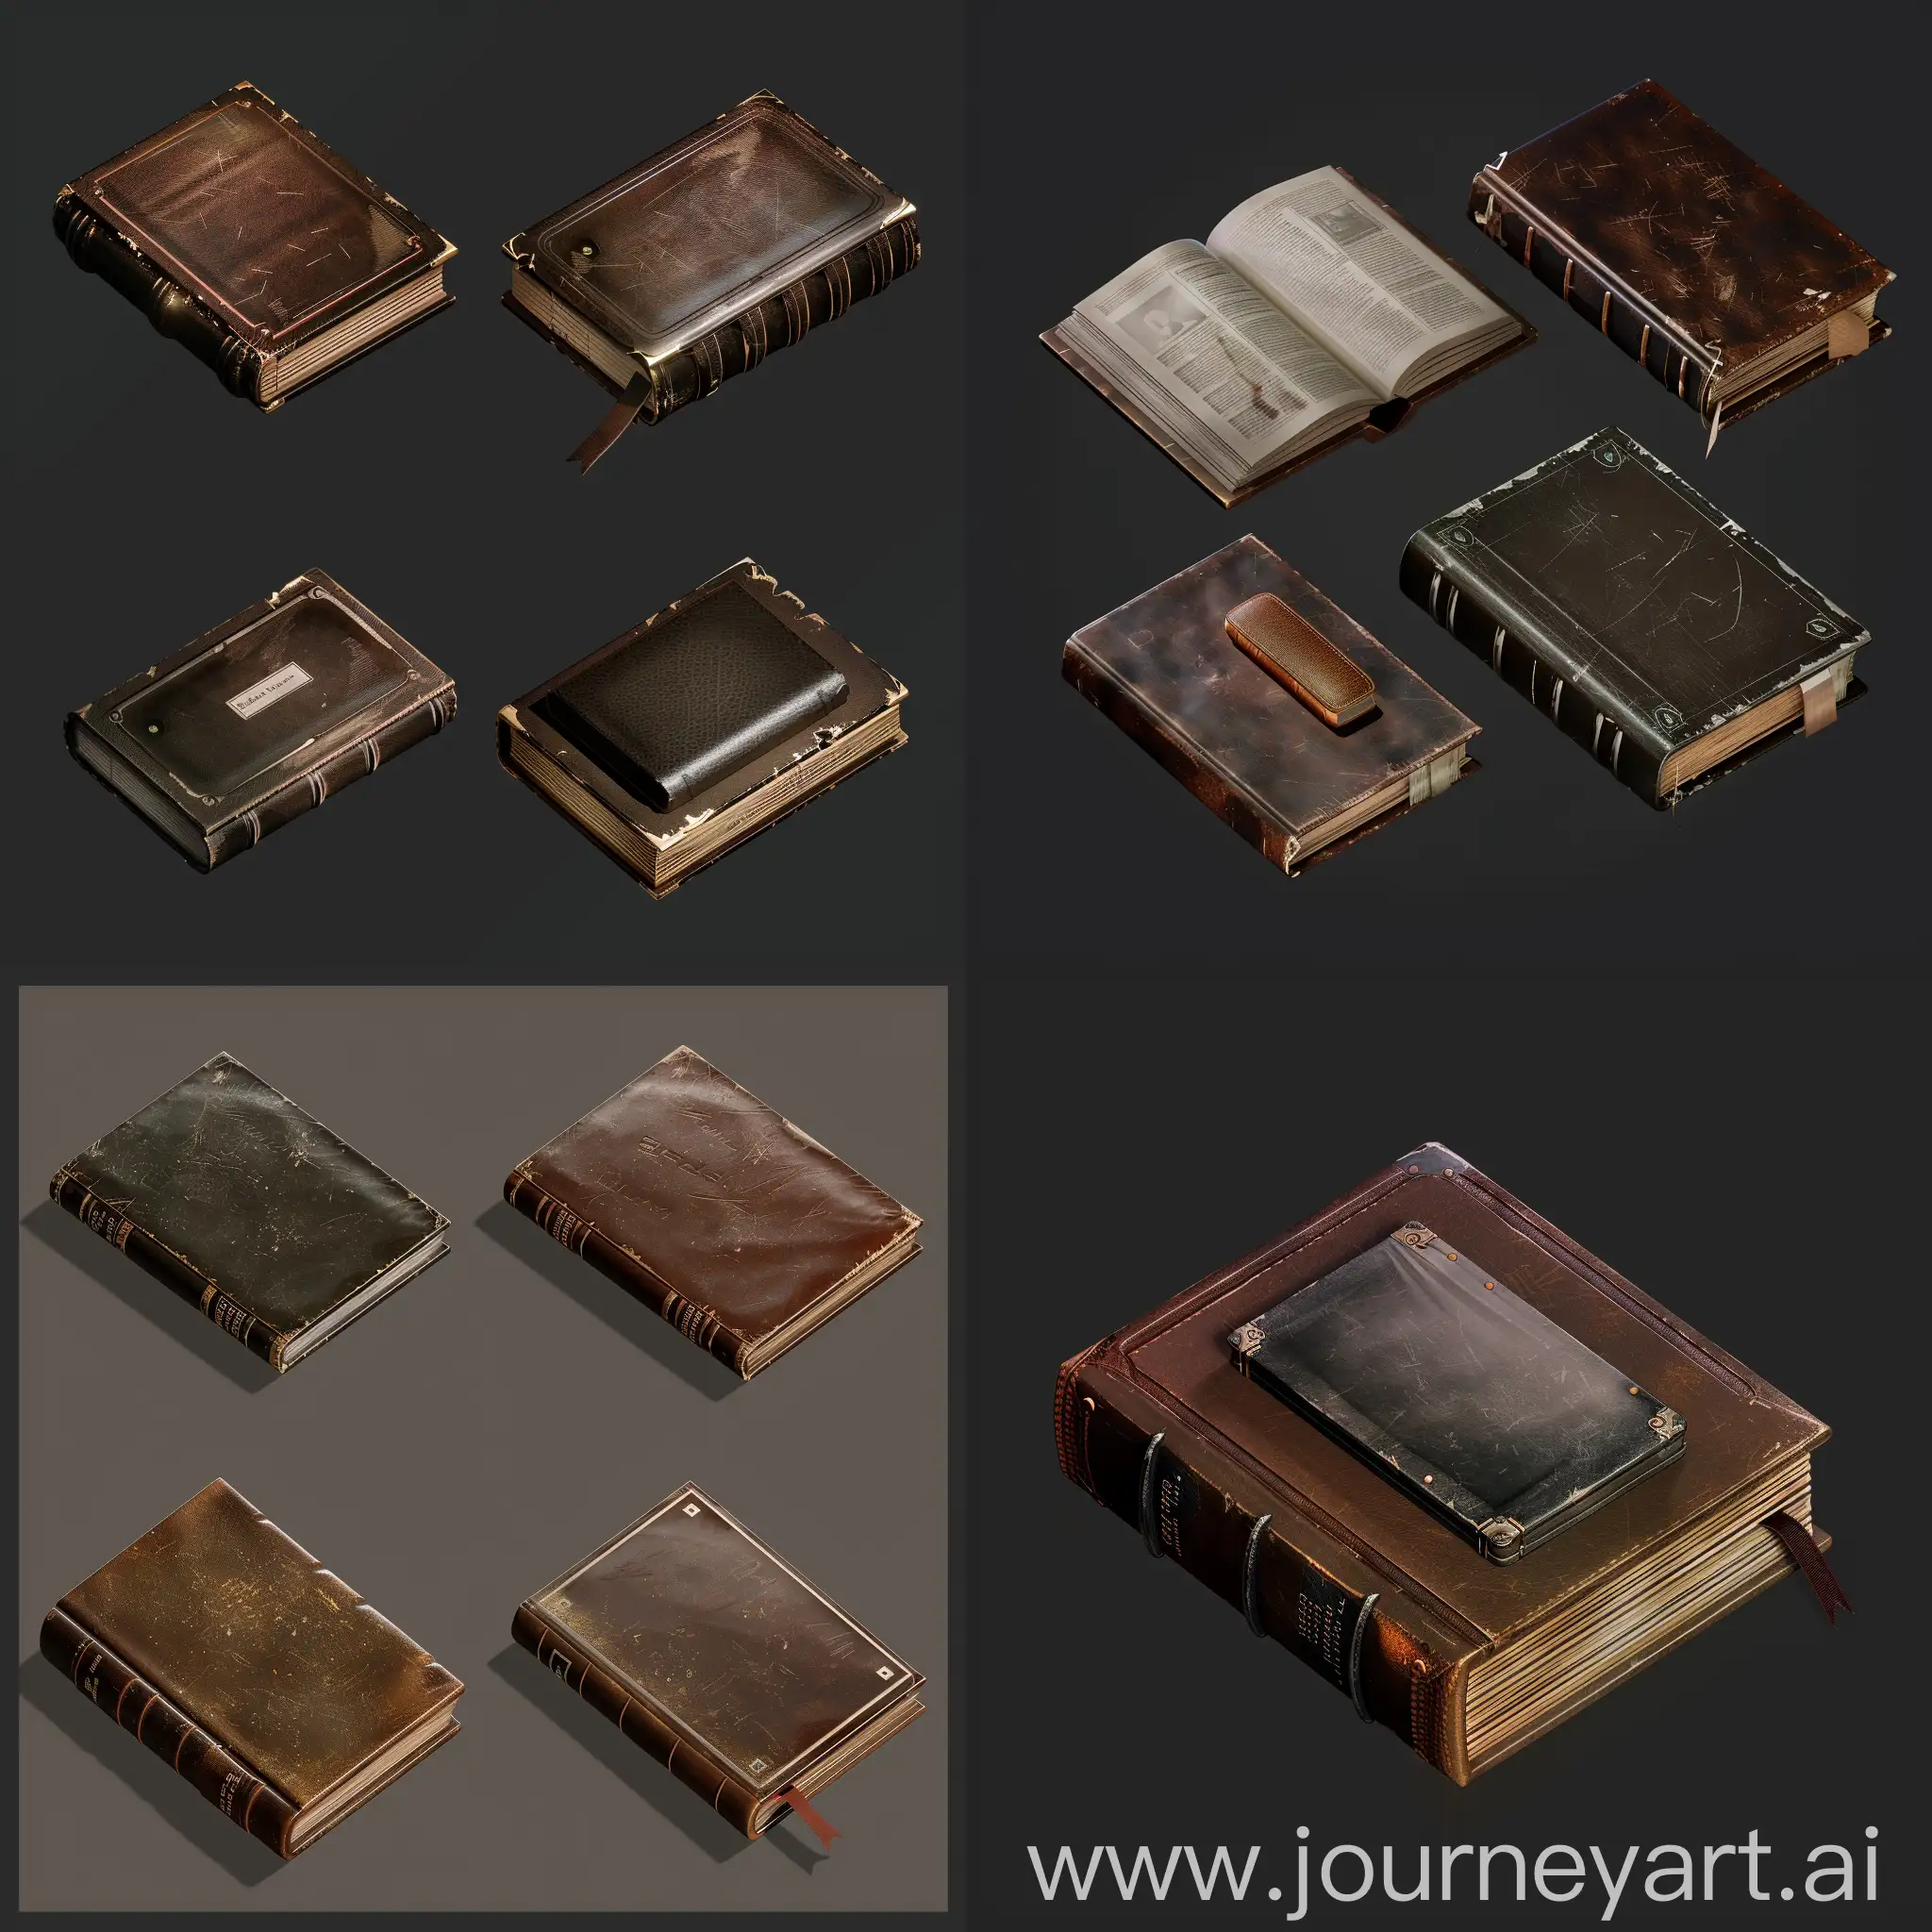 https://i.imgur.com/Do8RrB5.png realistic photo of isometric set old simple worn book without labels in style of unreal engine 5 realistic 3d game asset, shiny, lighting, leather cover, isometric set